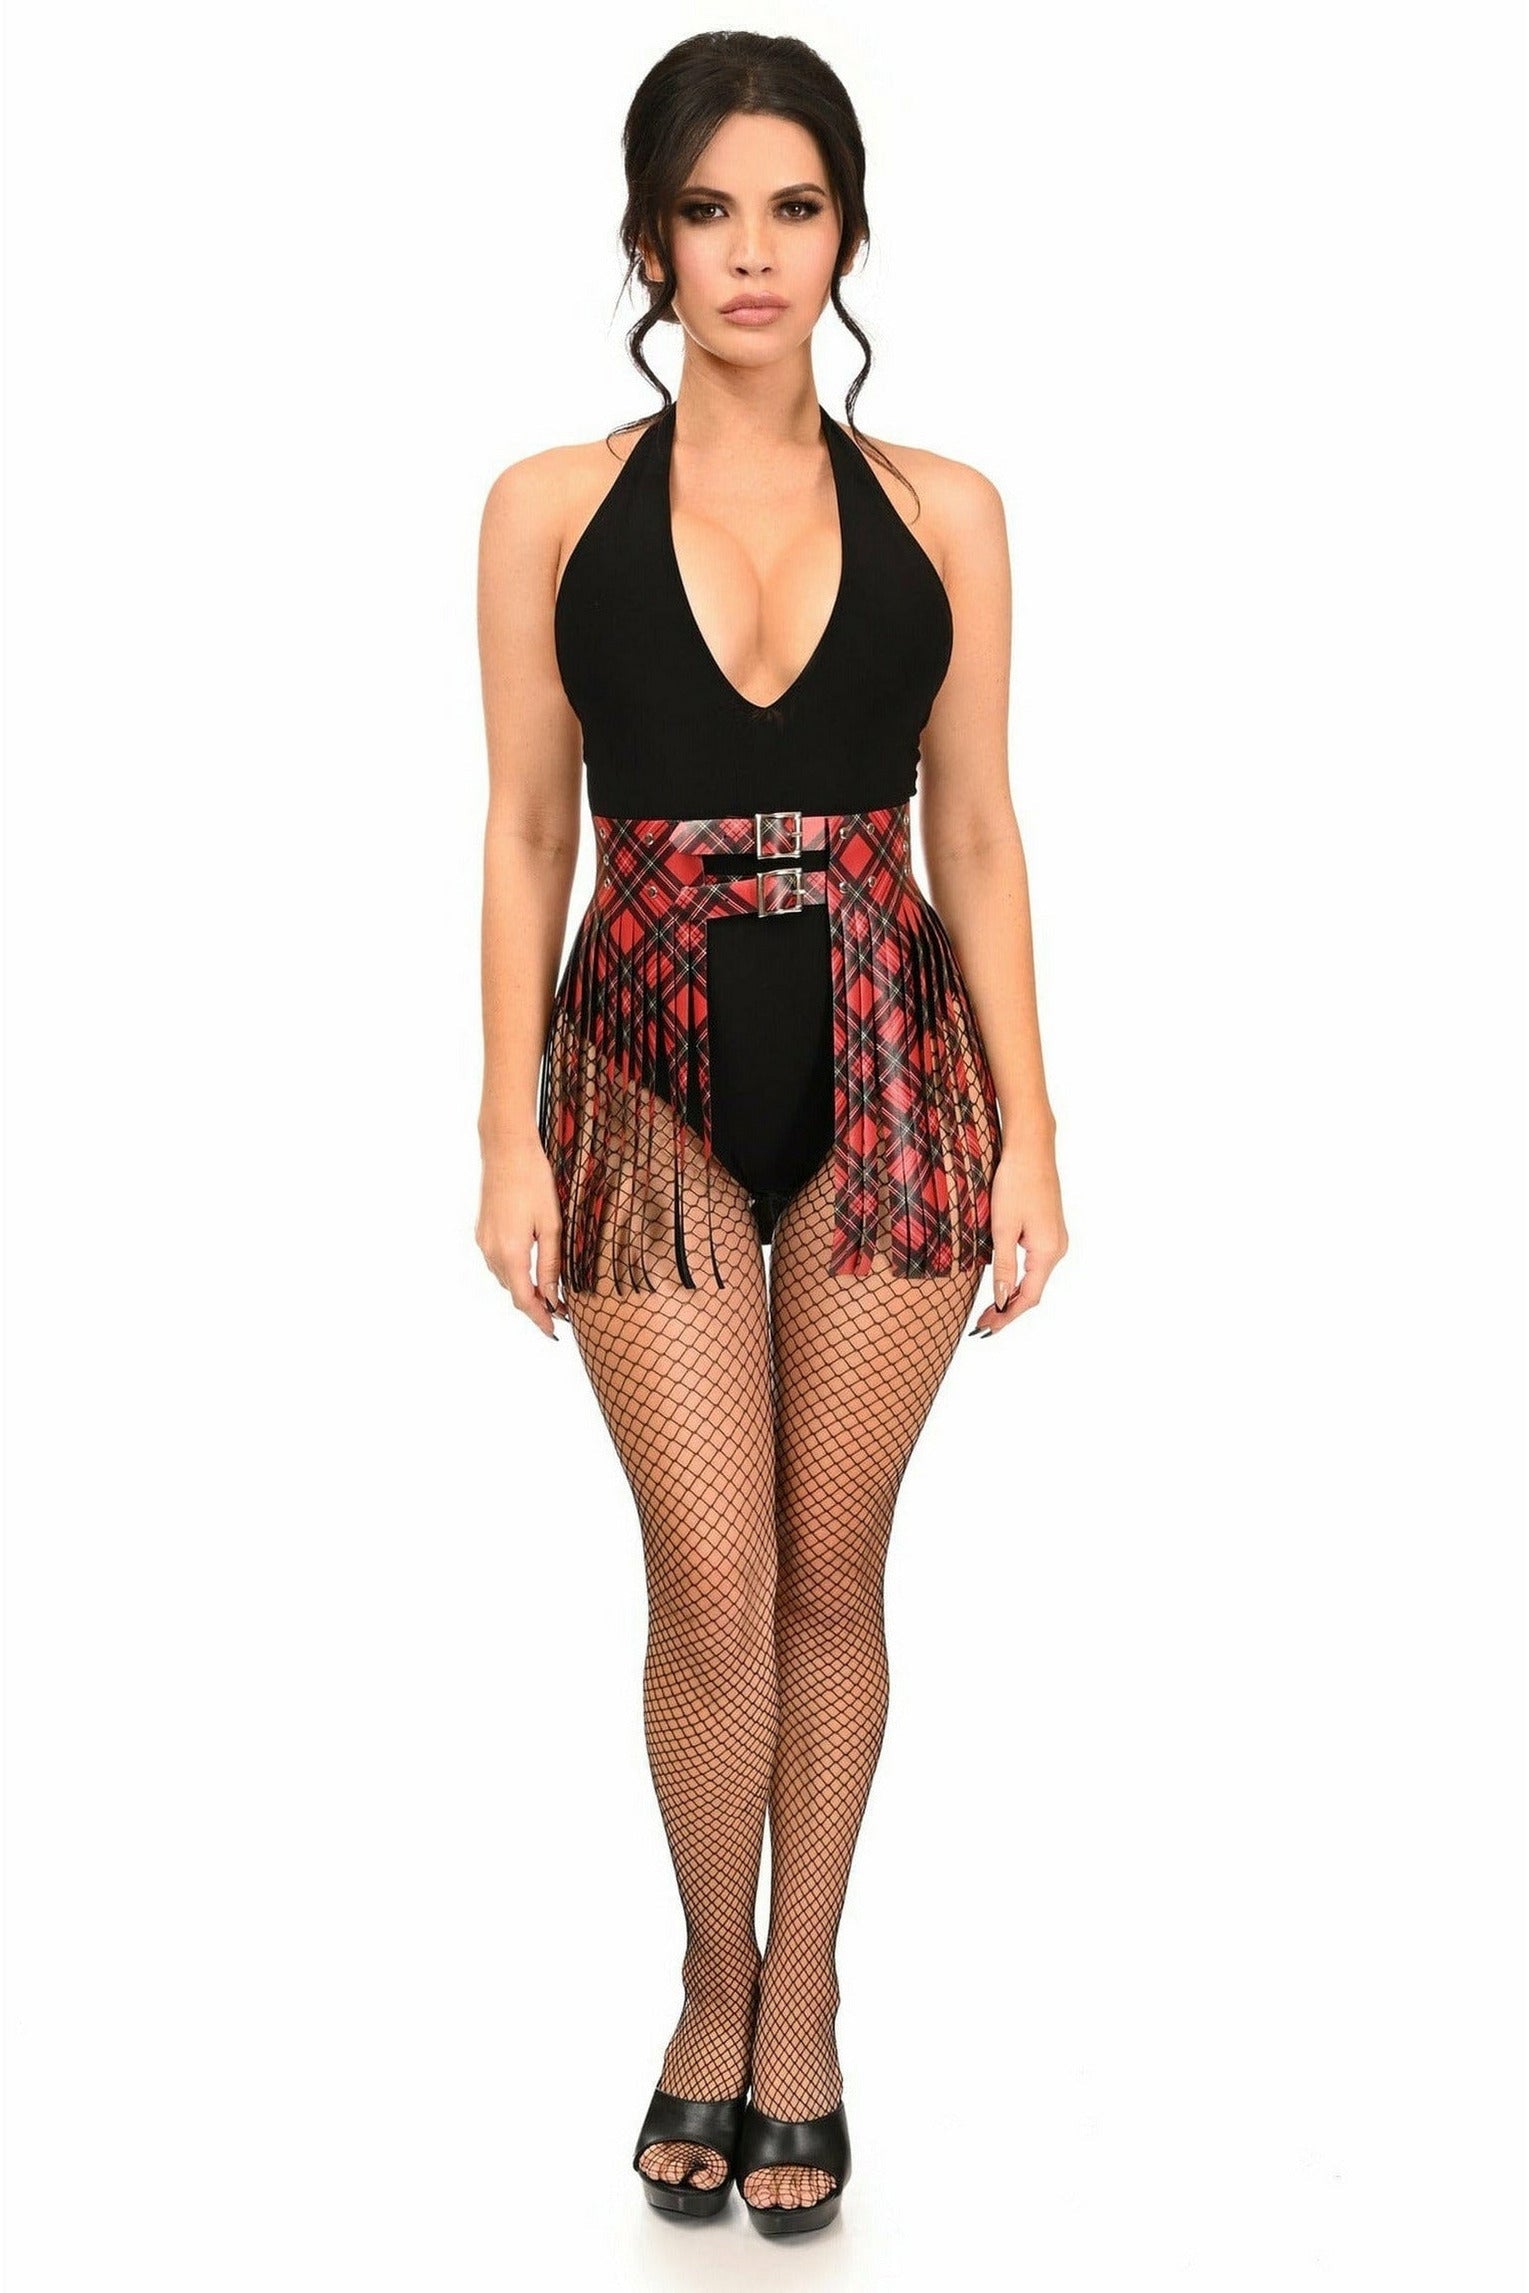 Daisy Corsets Red Plaid Faux Leather Fringe Skirt